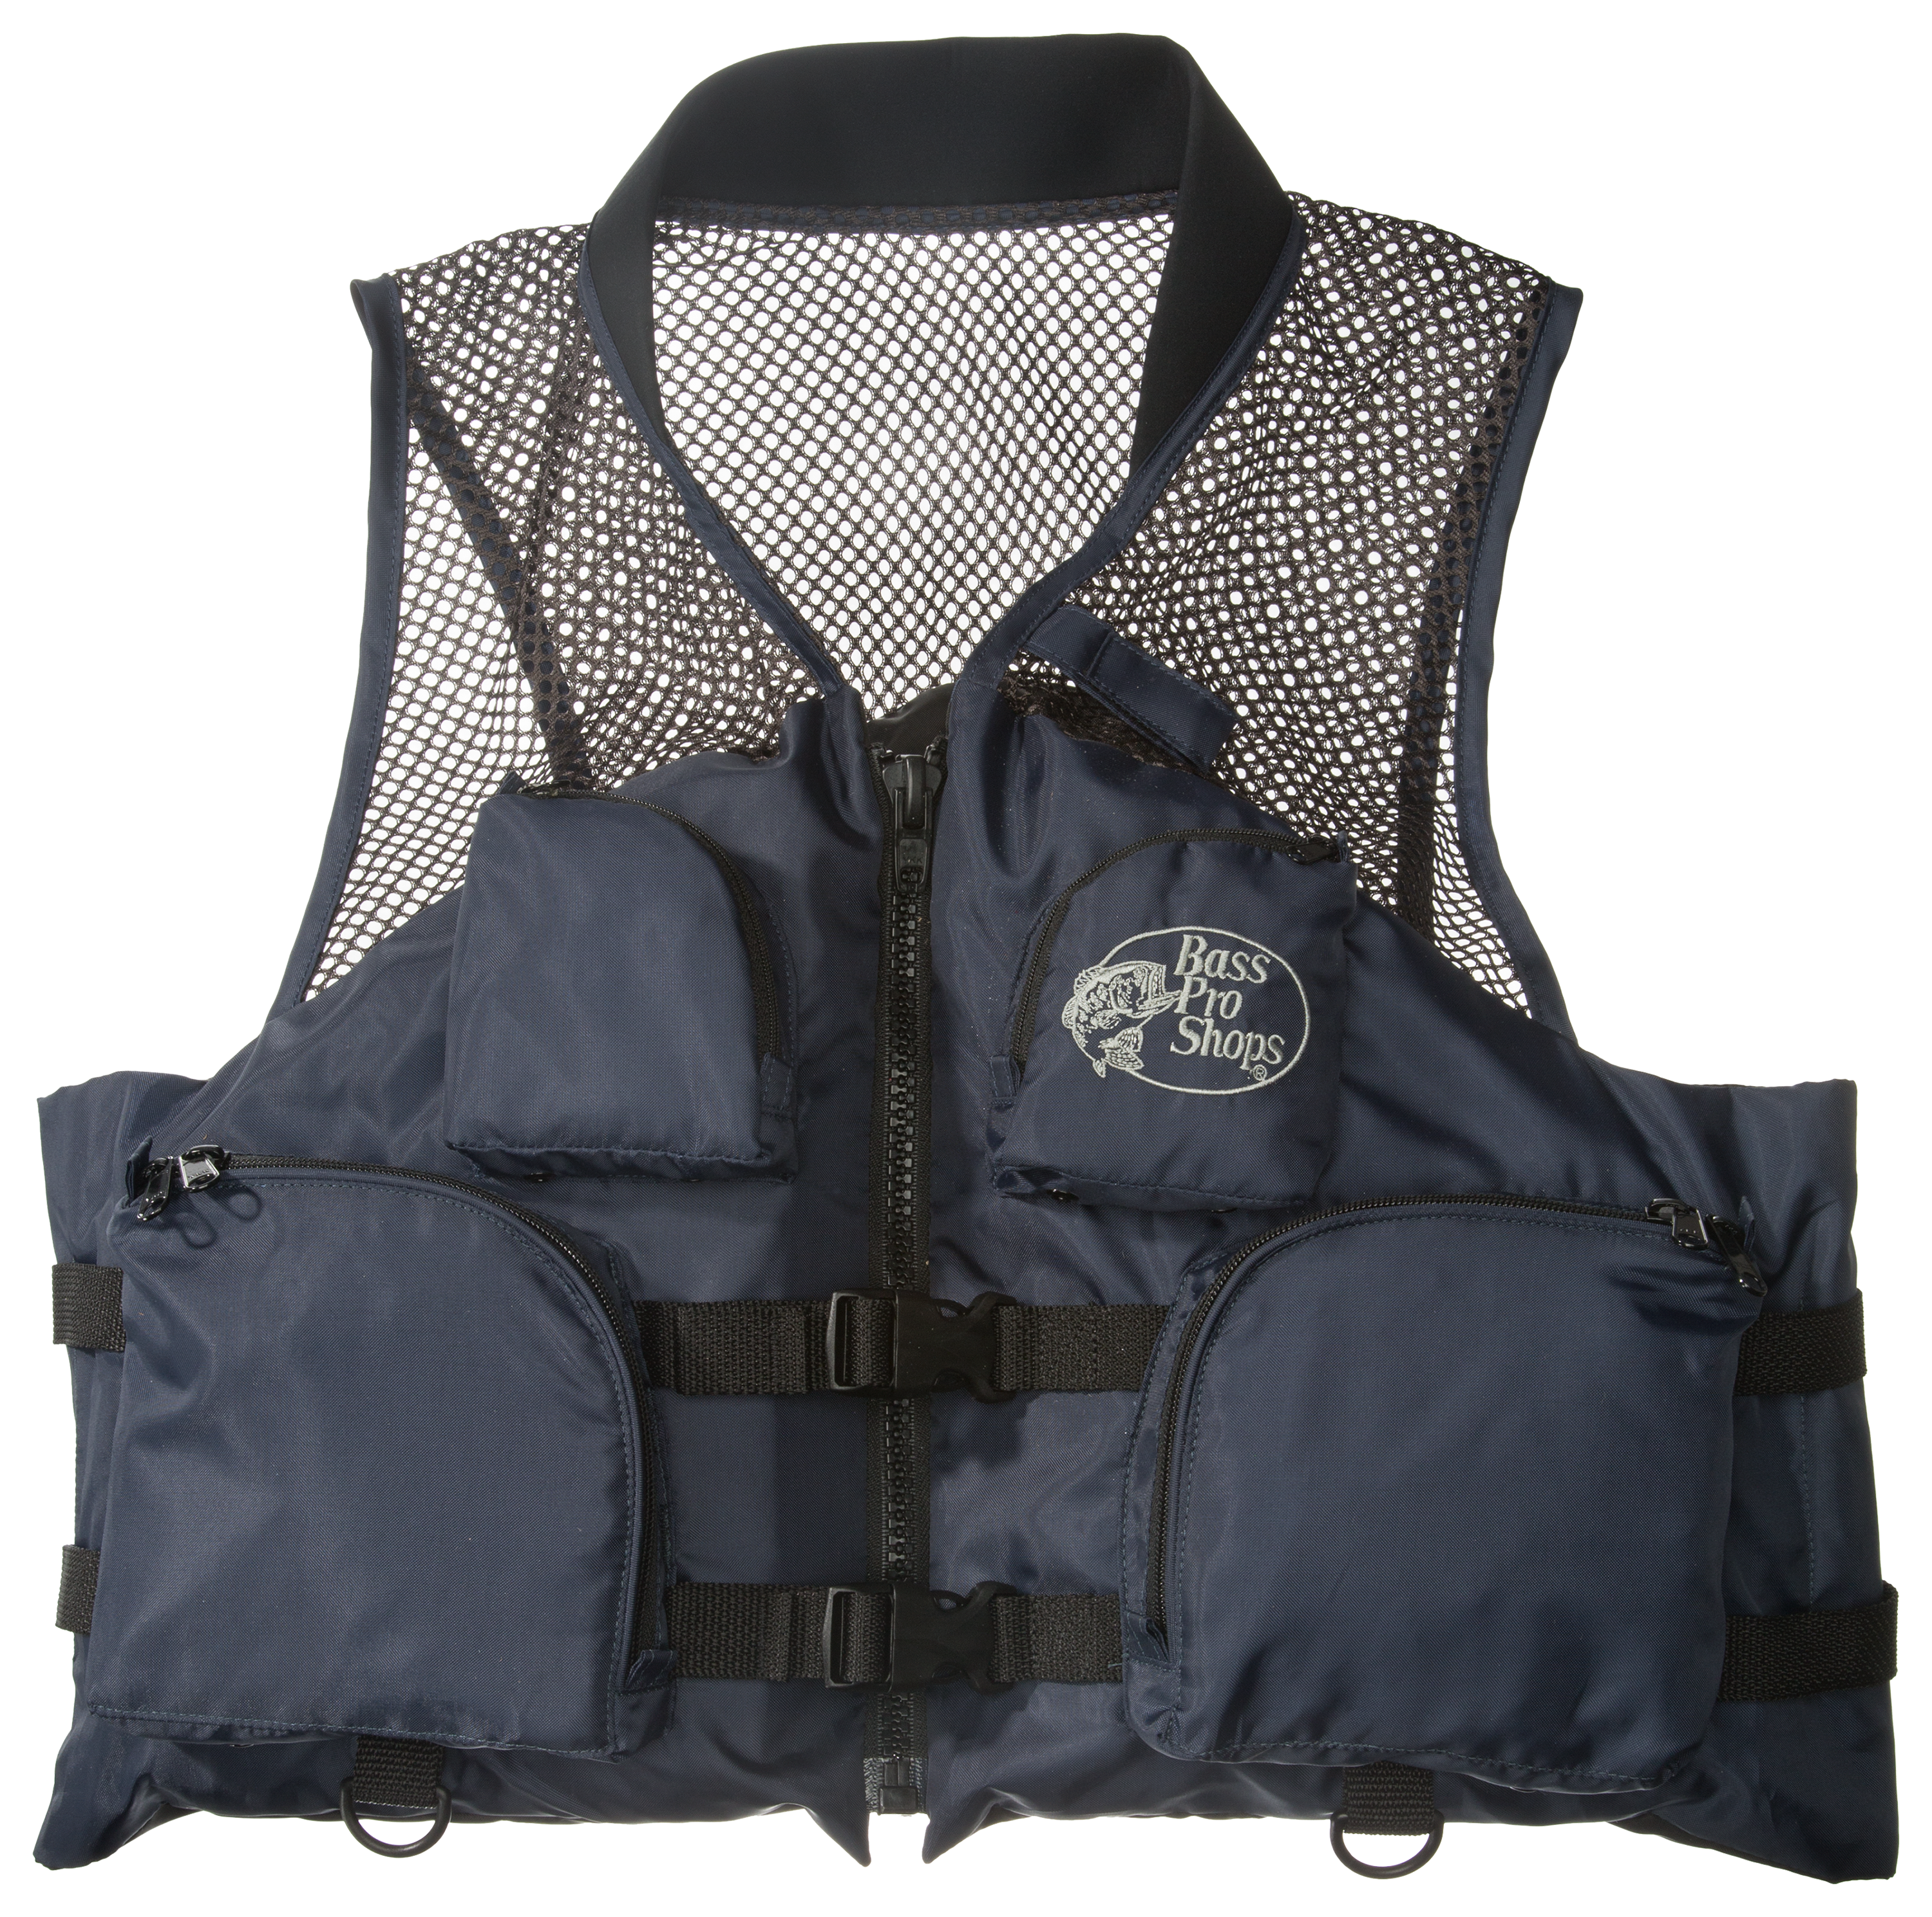 Bass Pro Shops Deluxe Mesh Fishing Life Vest for Adults - Silver Grey - 3XL